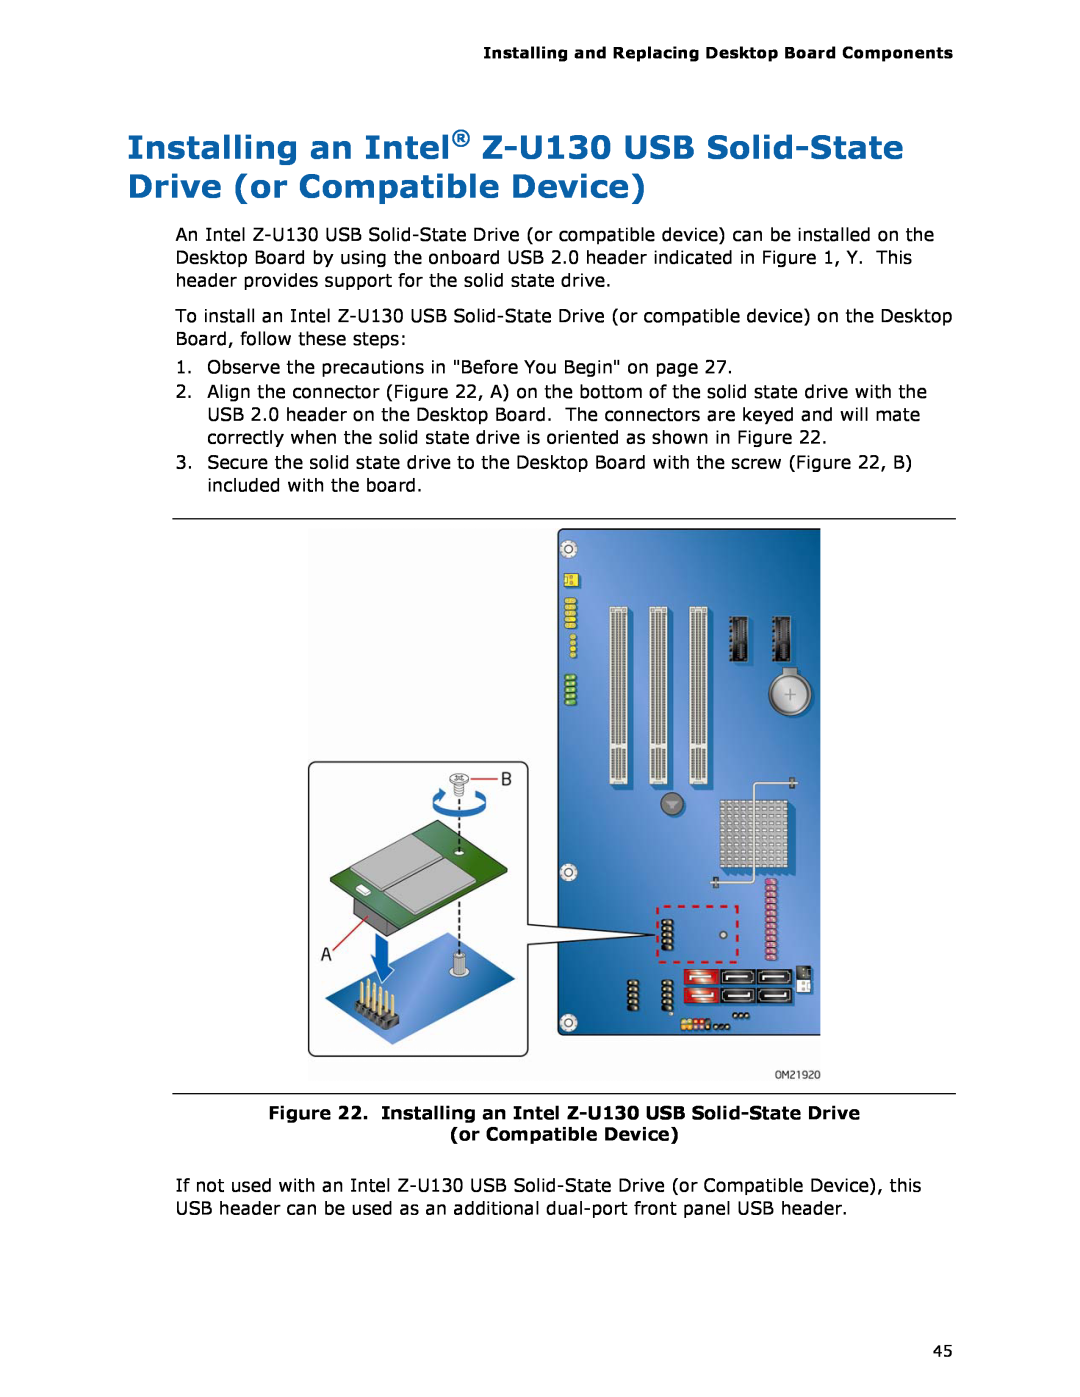 Intel BOXDH55HC manual Installing an Intel Z-U130 USB Solid-State Drive or Compatible Device 